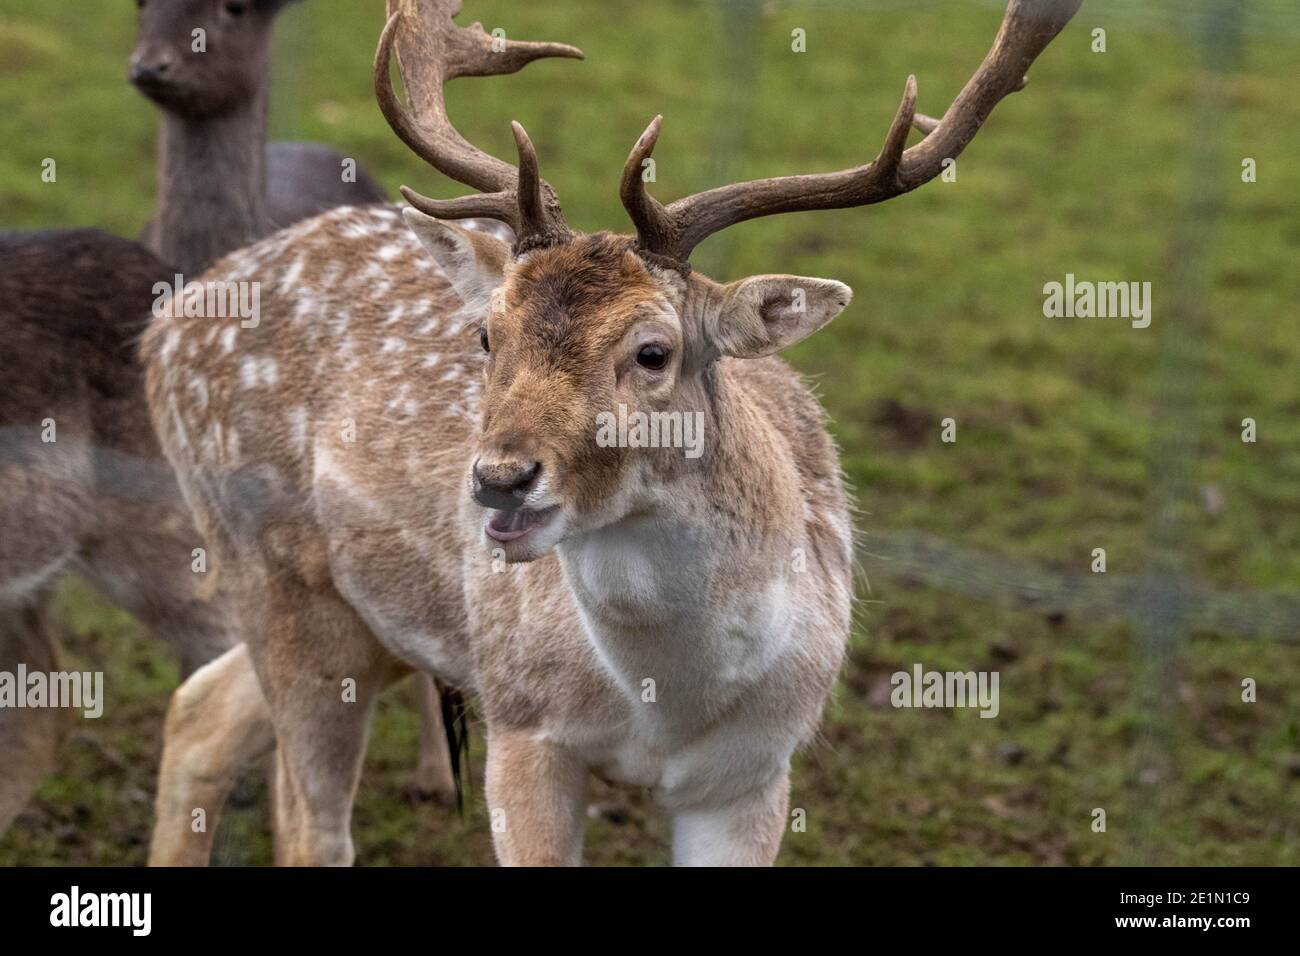 Brentwood Essex 8th January 2021 WEATHER A cold and misty day in Weald Park Brentwood Essex fallow buck Deer, Credit: Ian Davidson/Alamy Live News Stock Photo